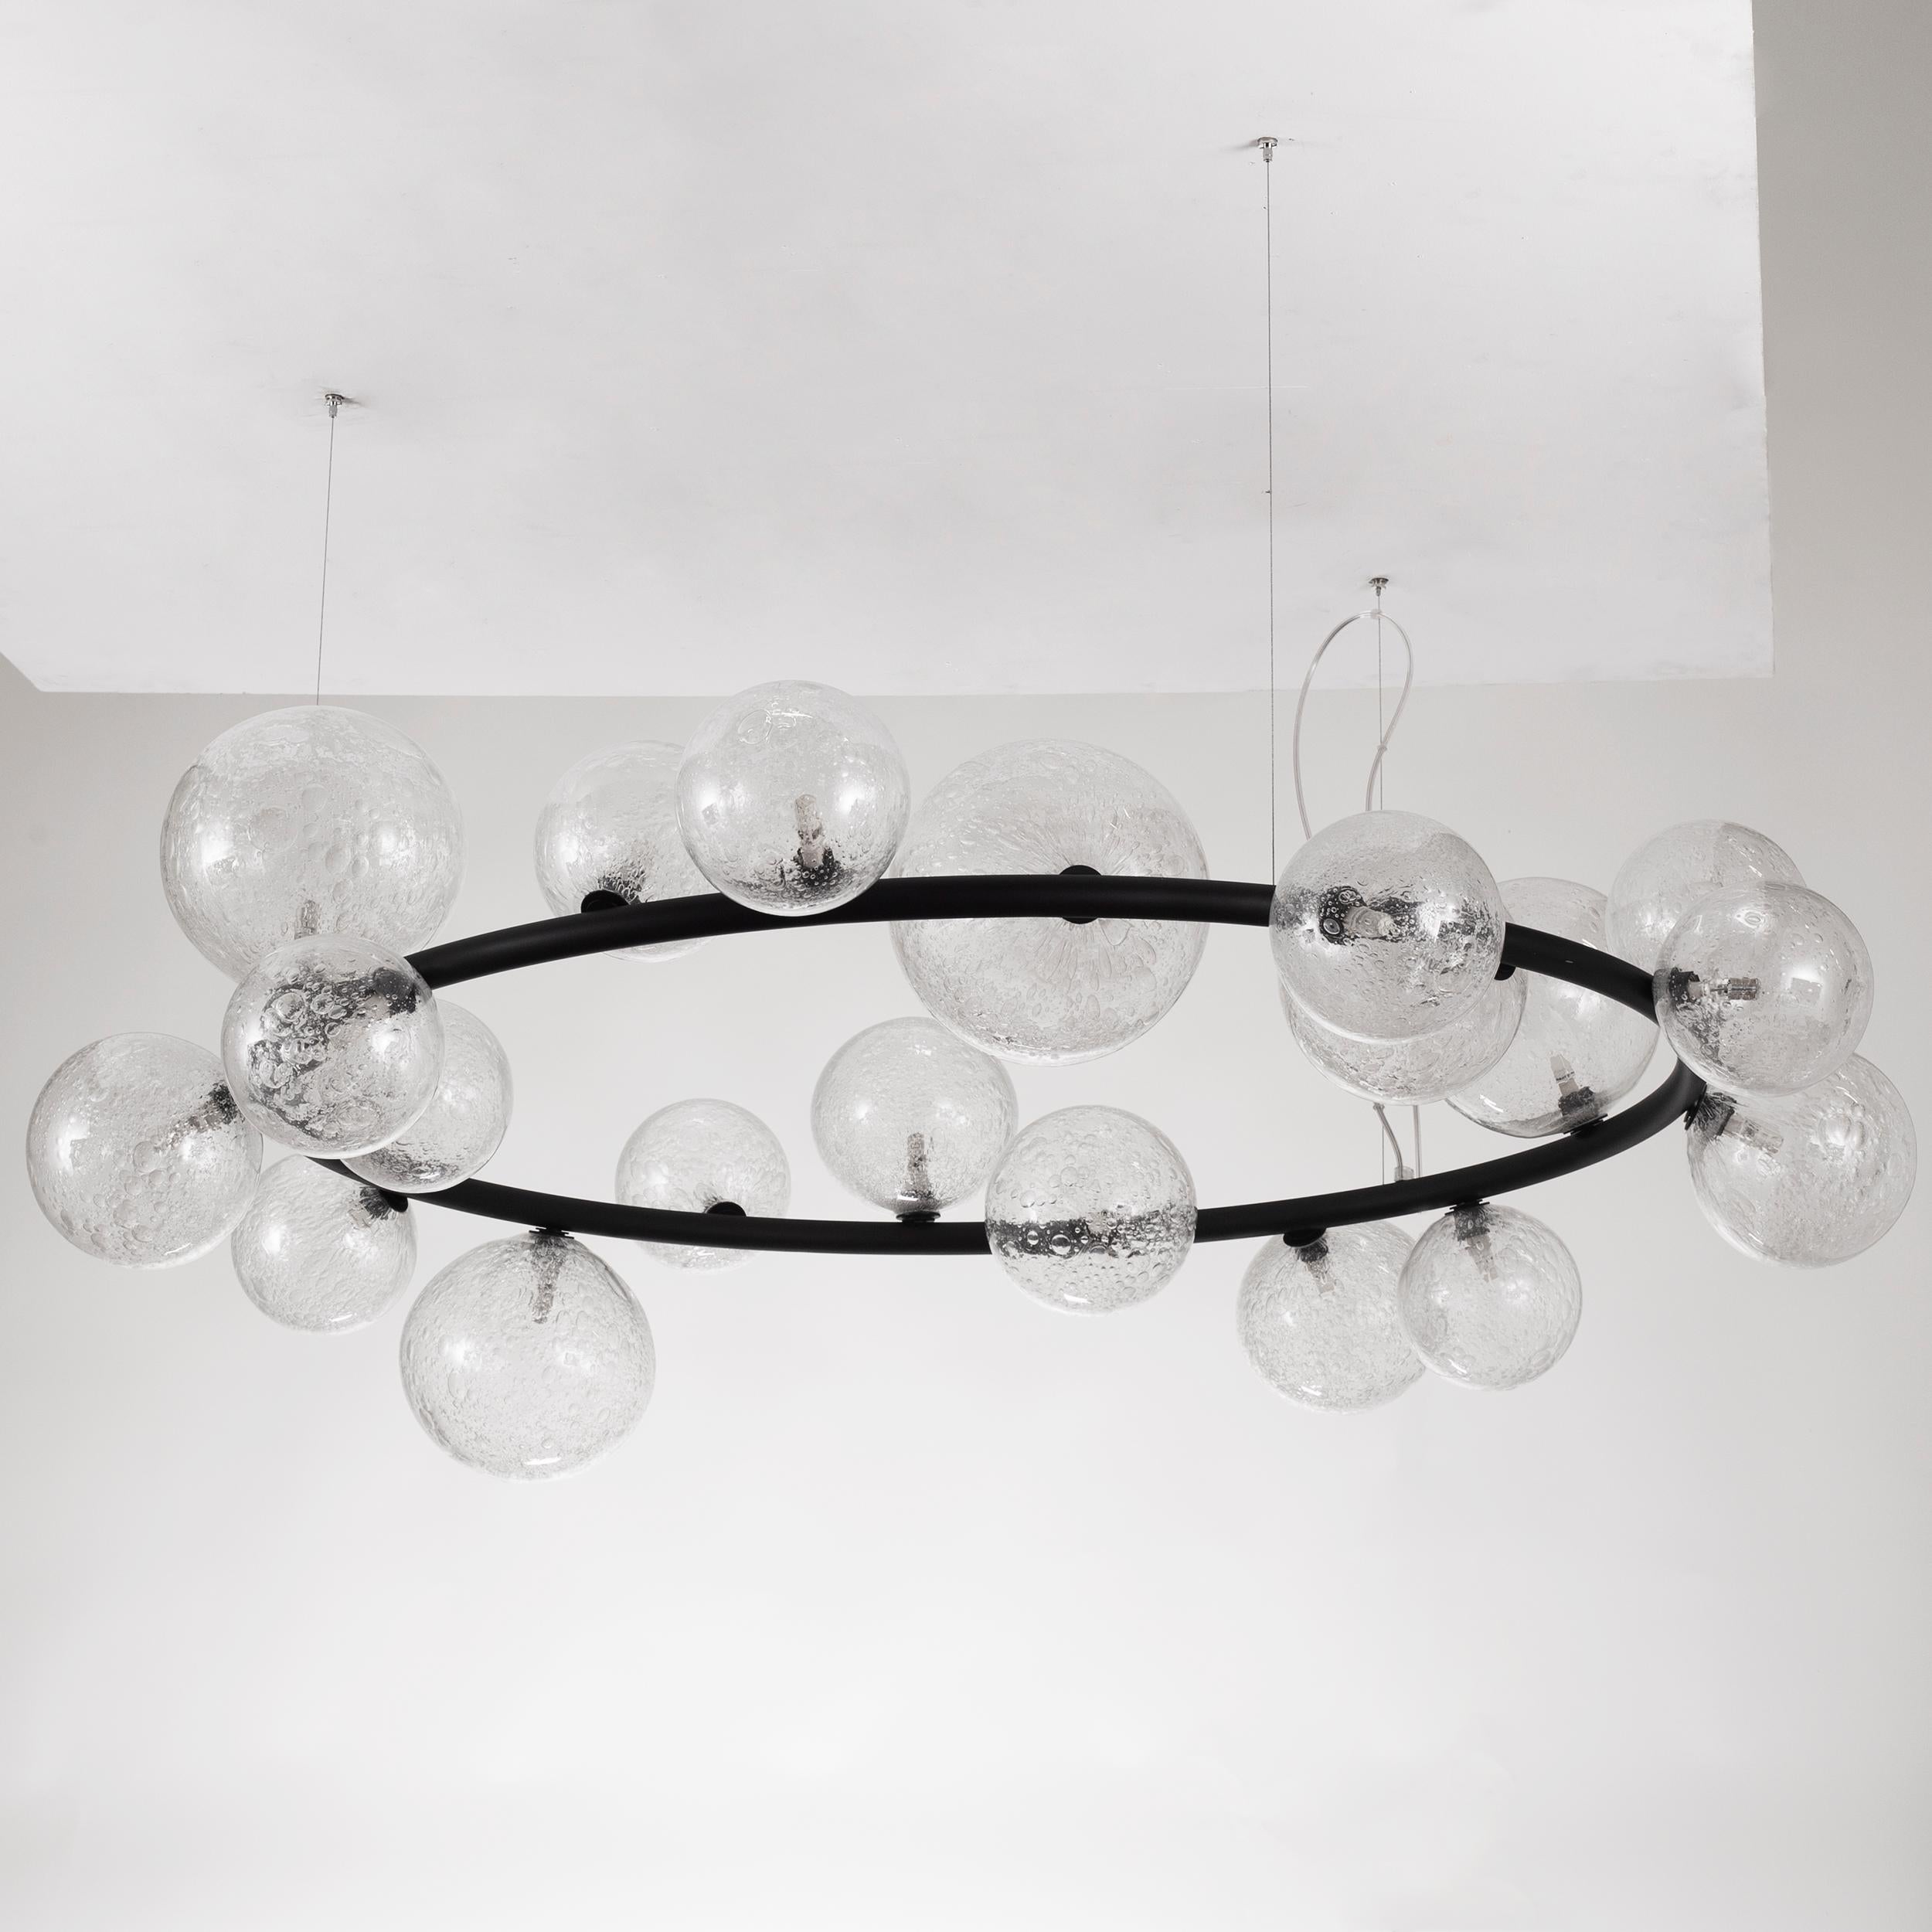 The Murano blown glass suspension has been designed with the aim of subverting the tradition and re-think of new decorative lighting solution. This lighting work is composed by irregular and asymmetric elements, but overall, it is characterized by